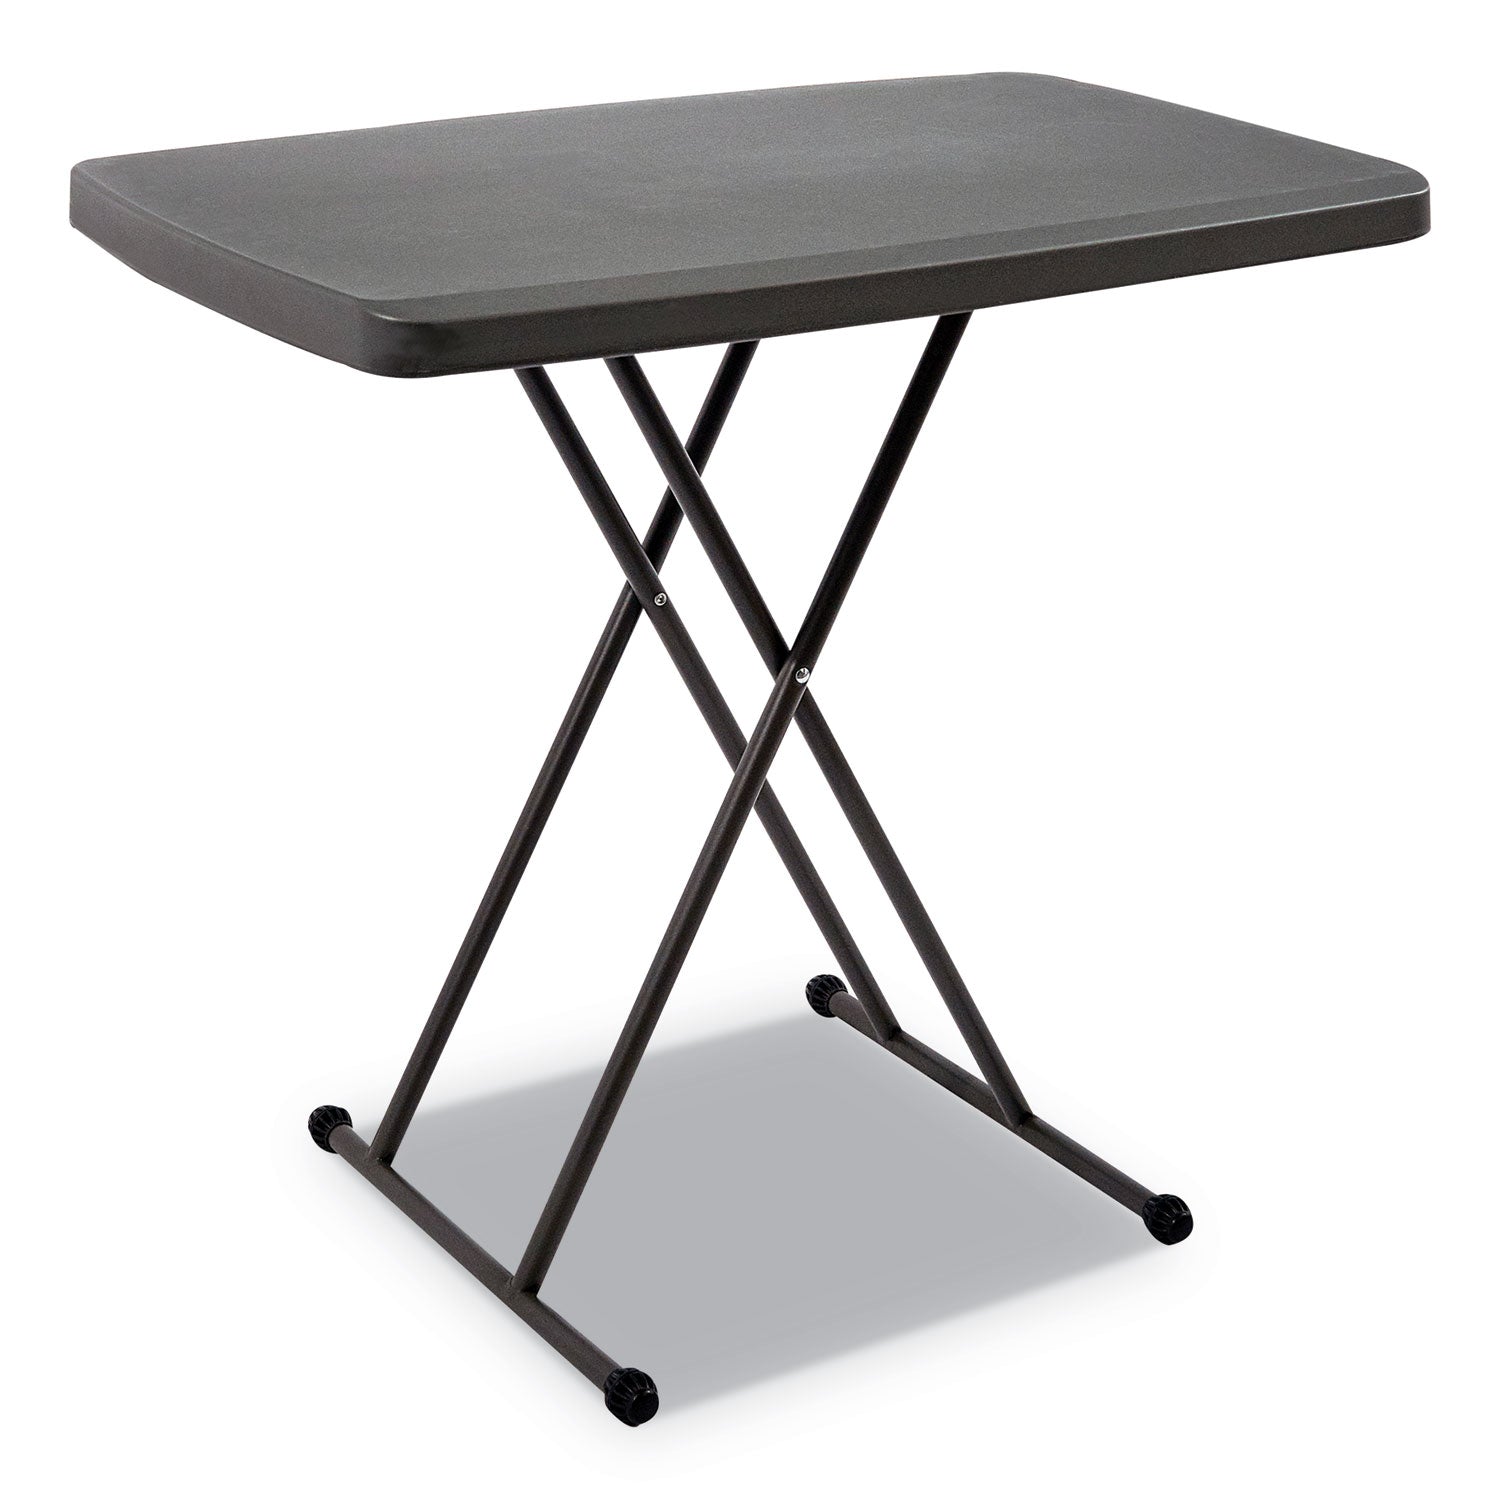 IndestrucTable Classic Personal Folding Table, 30" x 20" x 25" to 28", Charcoal - 1